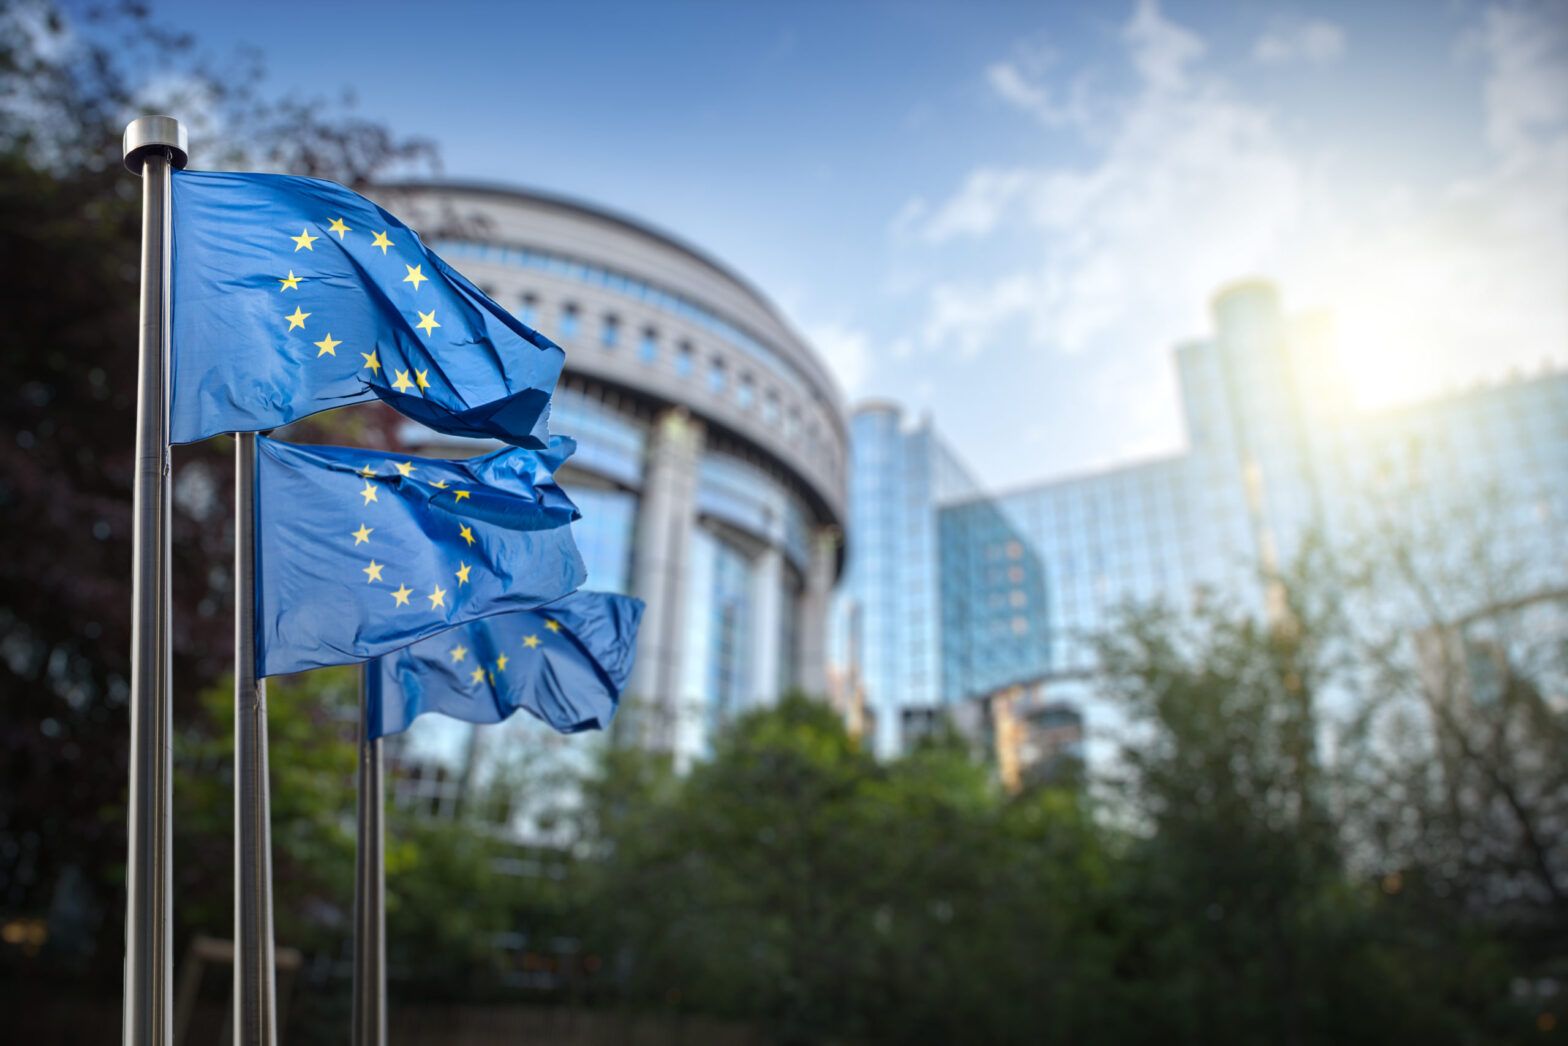 EU due diligence law ‘light touch’ on financial sector